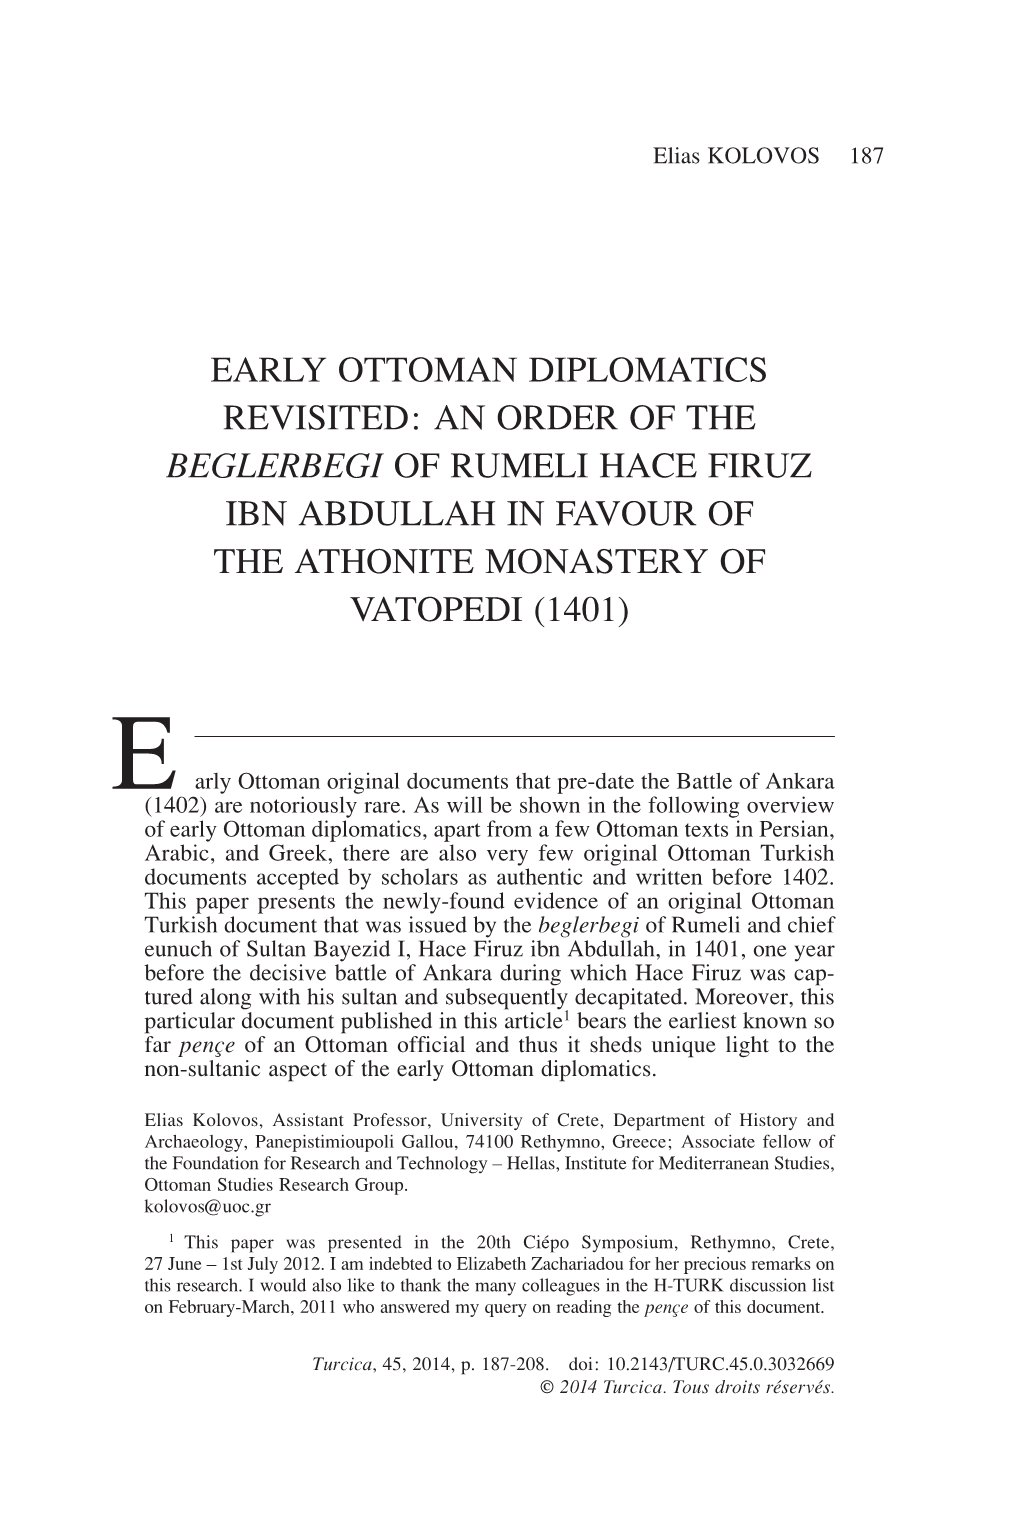 Early Ottoman Diplomatics Revisited: an Order of the Beglerbegi of Rumeli Hace Firuz Ibn Abdullah in Favour of the Athonite Monastery of Vatopedi (1401)